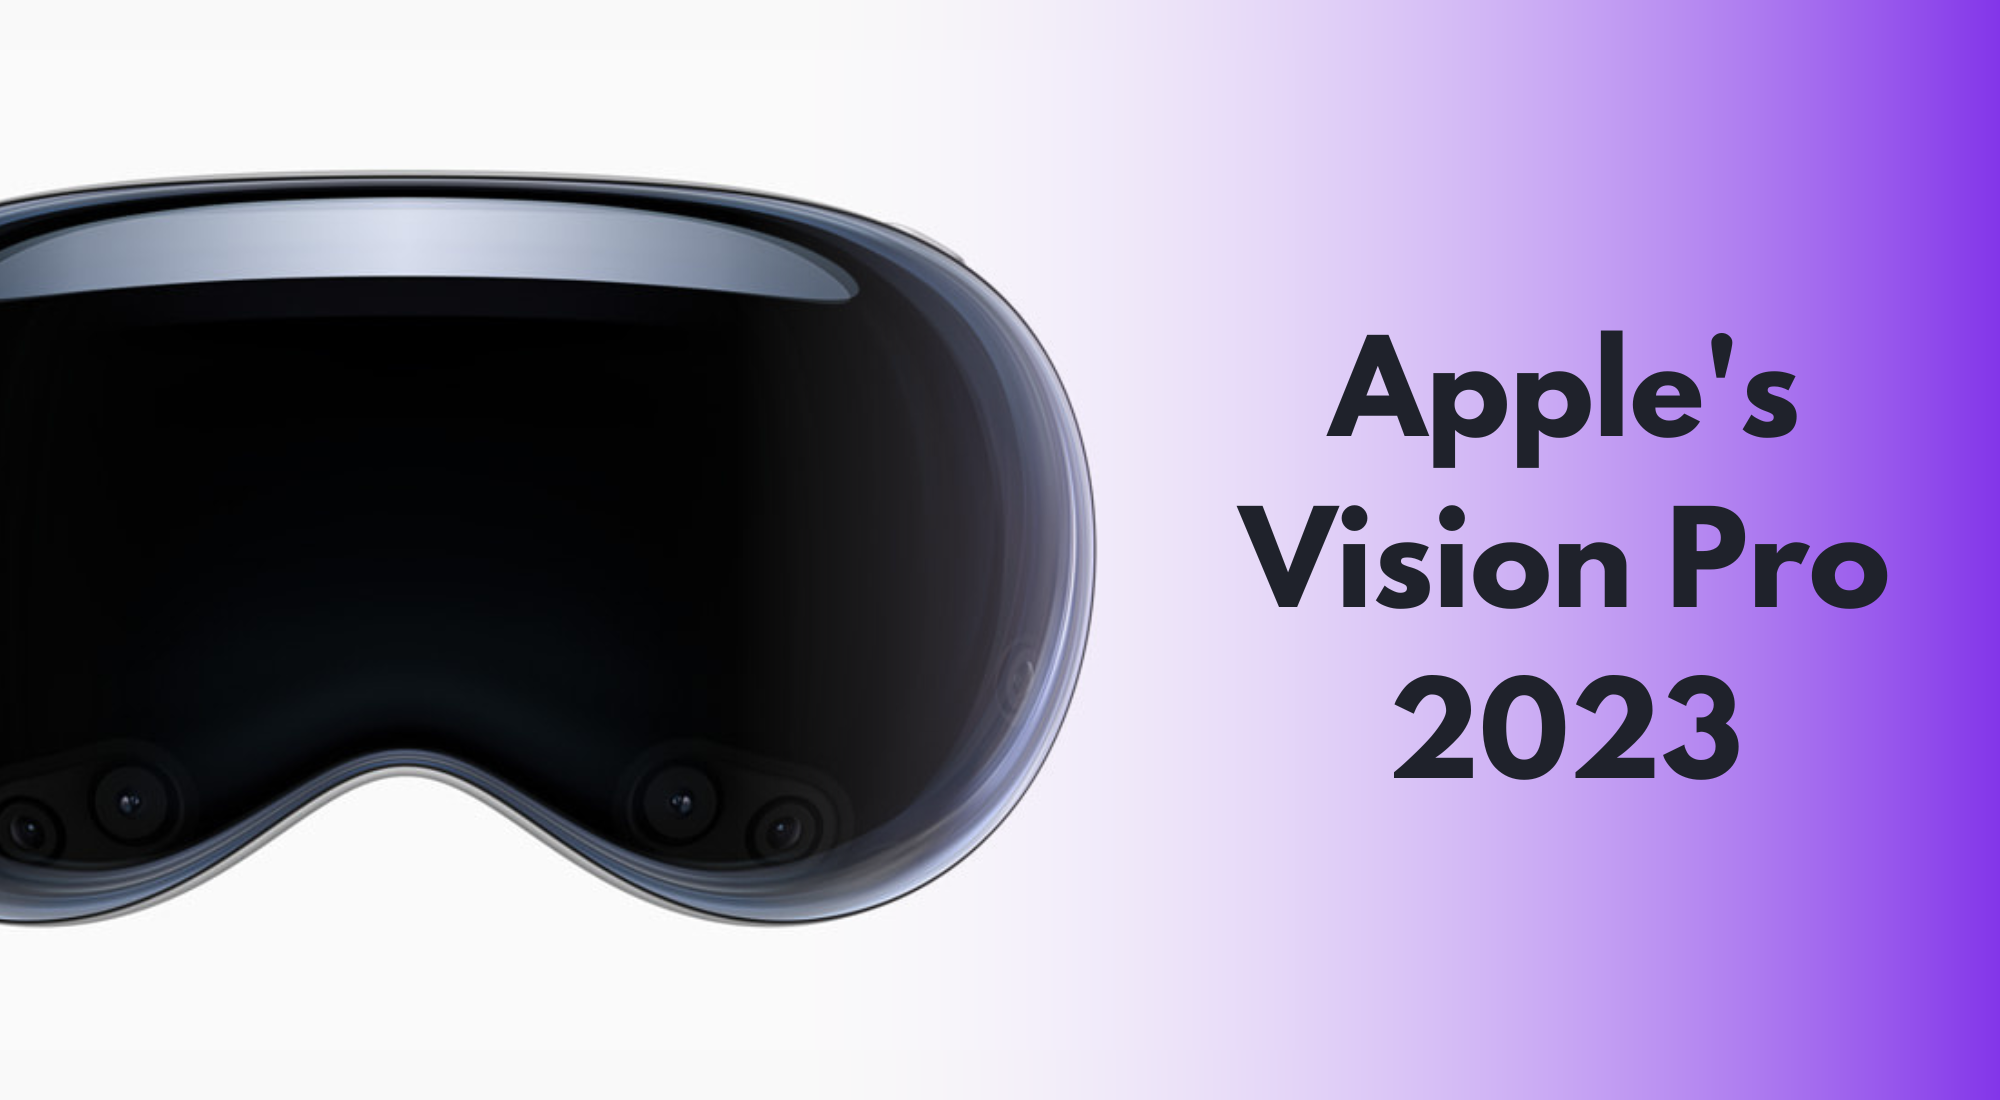 How to use Apple vision pro 2023